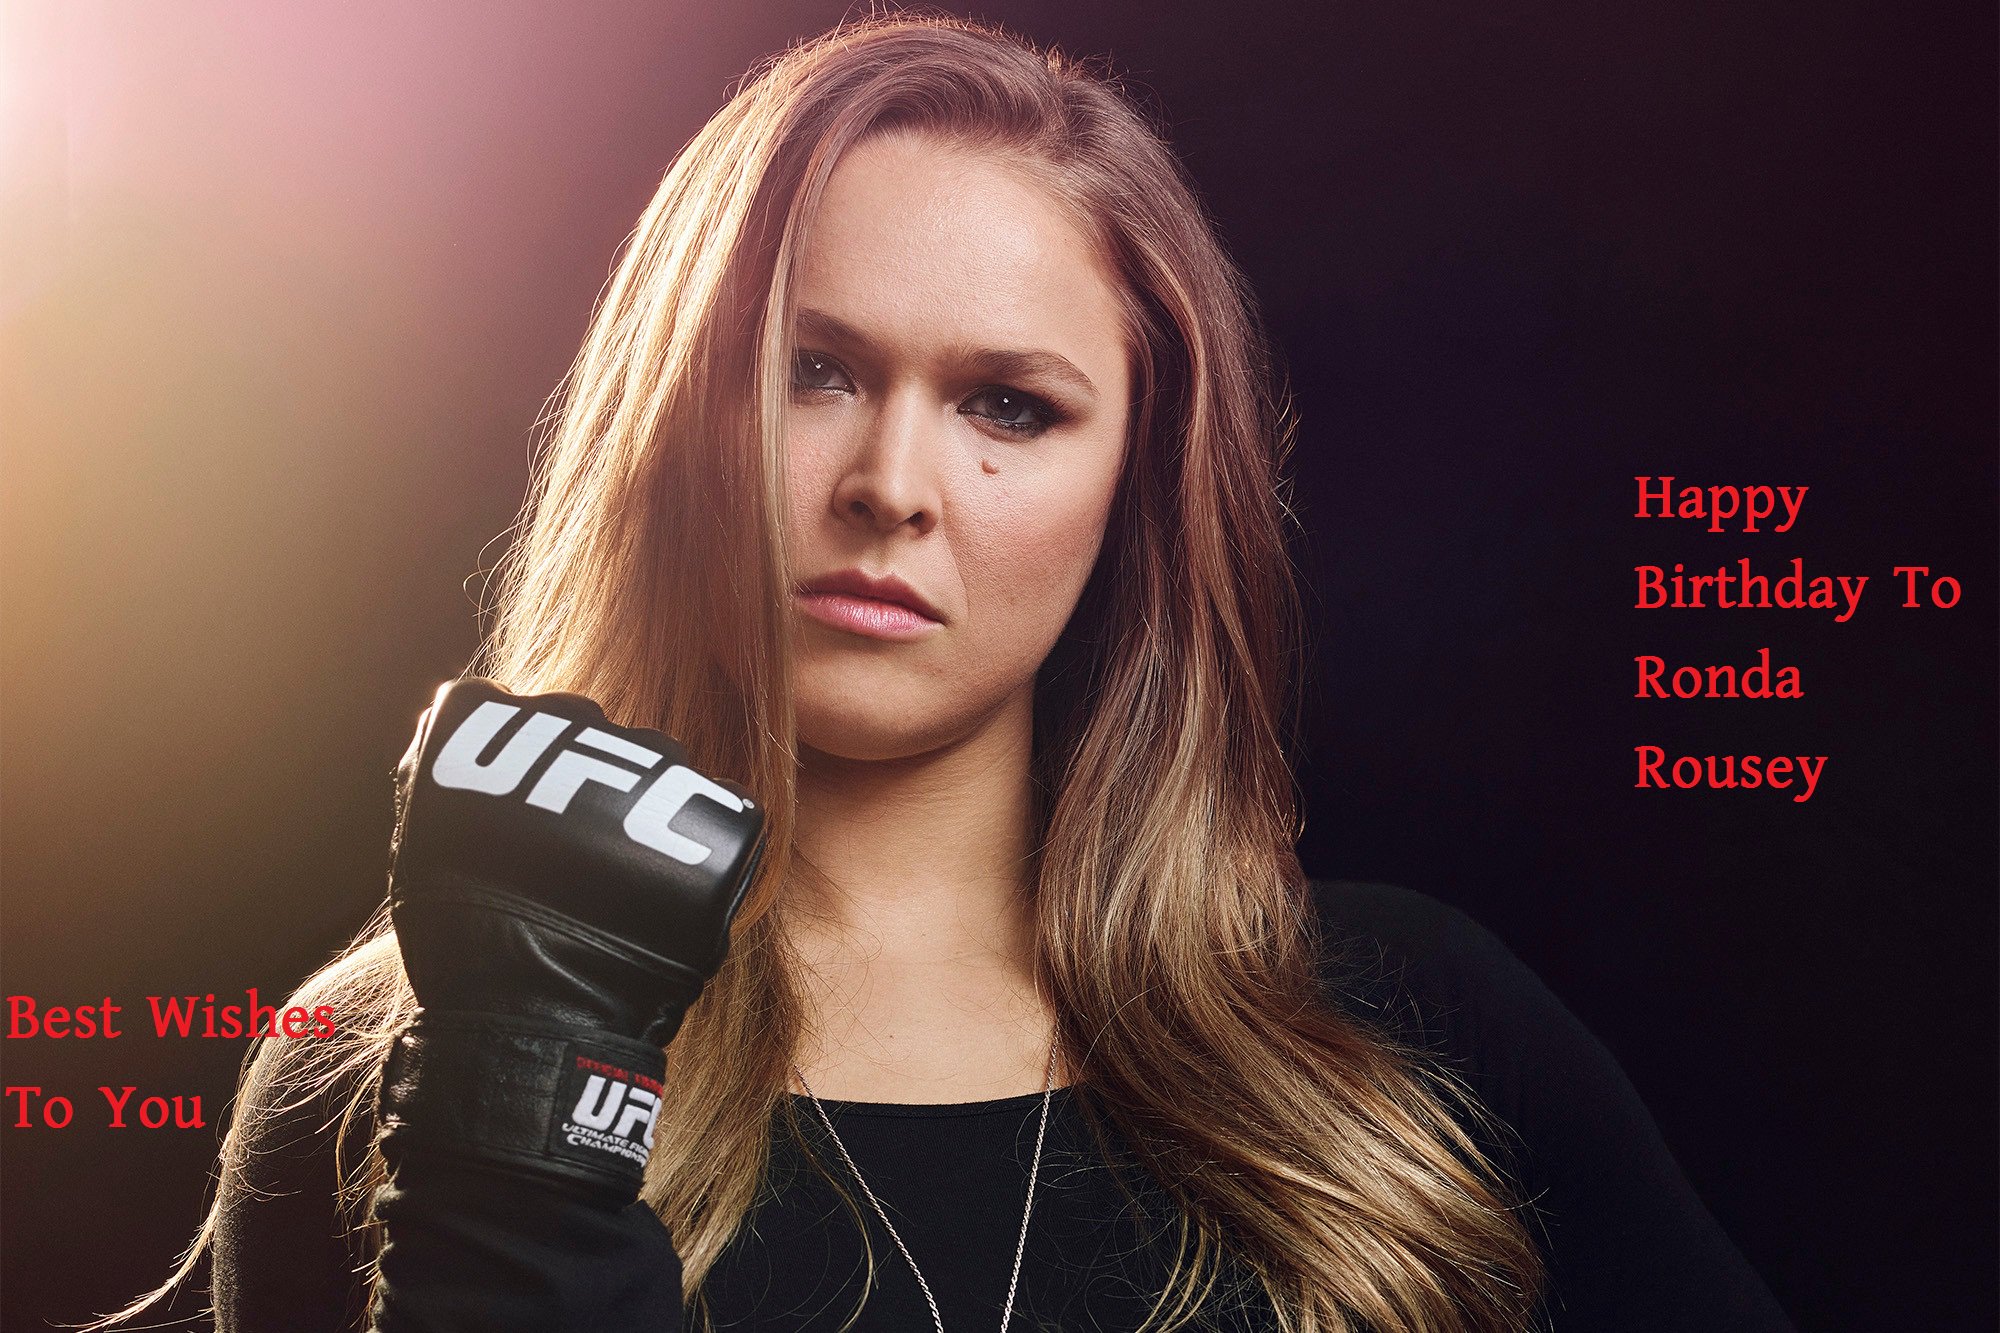 Happy
Happy Birthday To Ronda Rousey            My Best Wishes To You   